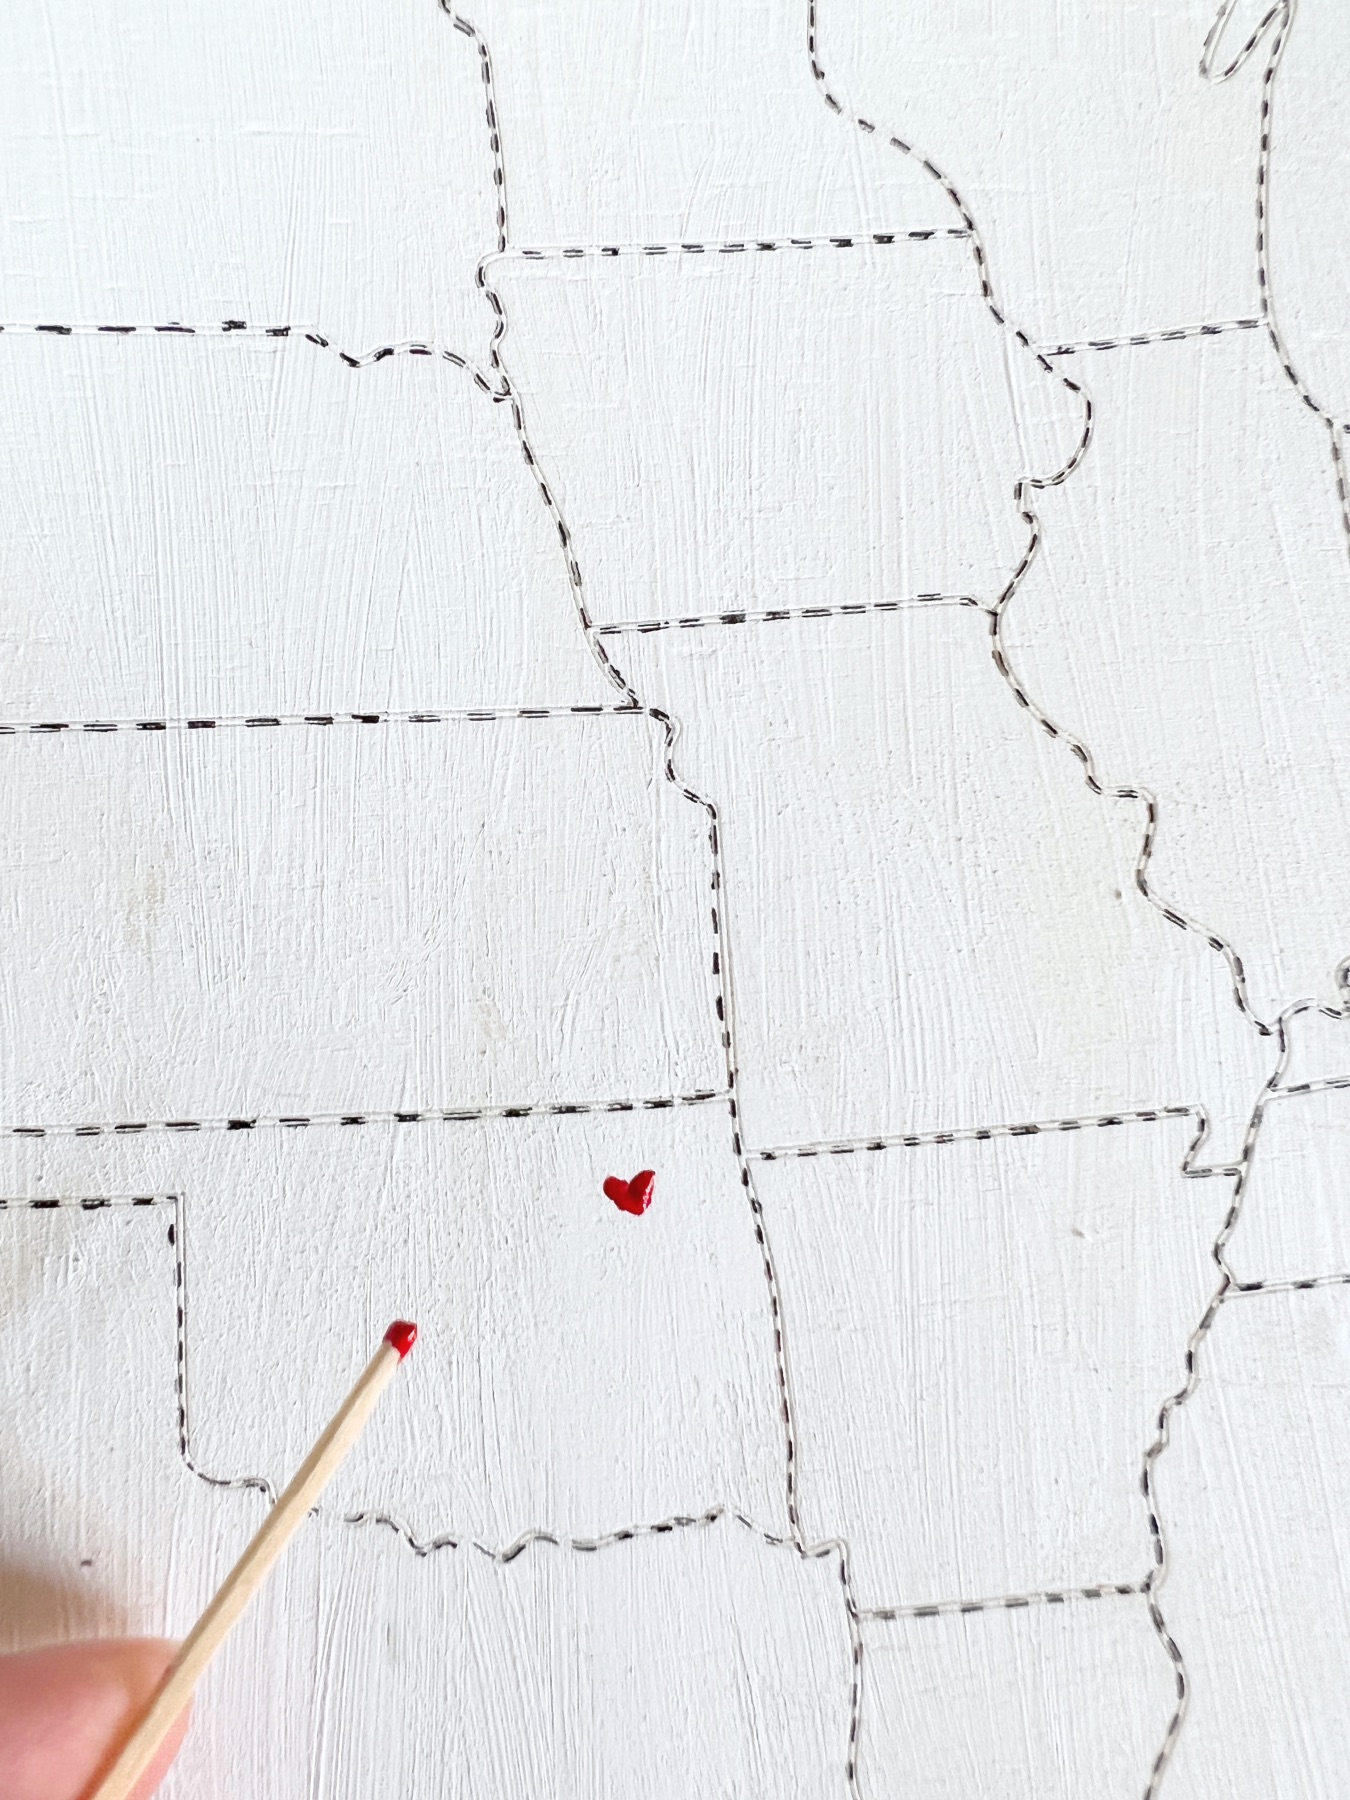 paint a red heart to show what city you are from